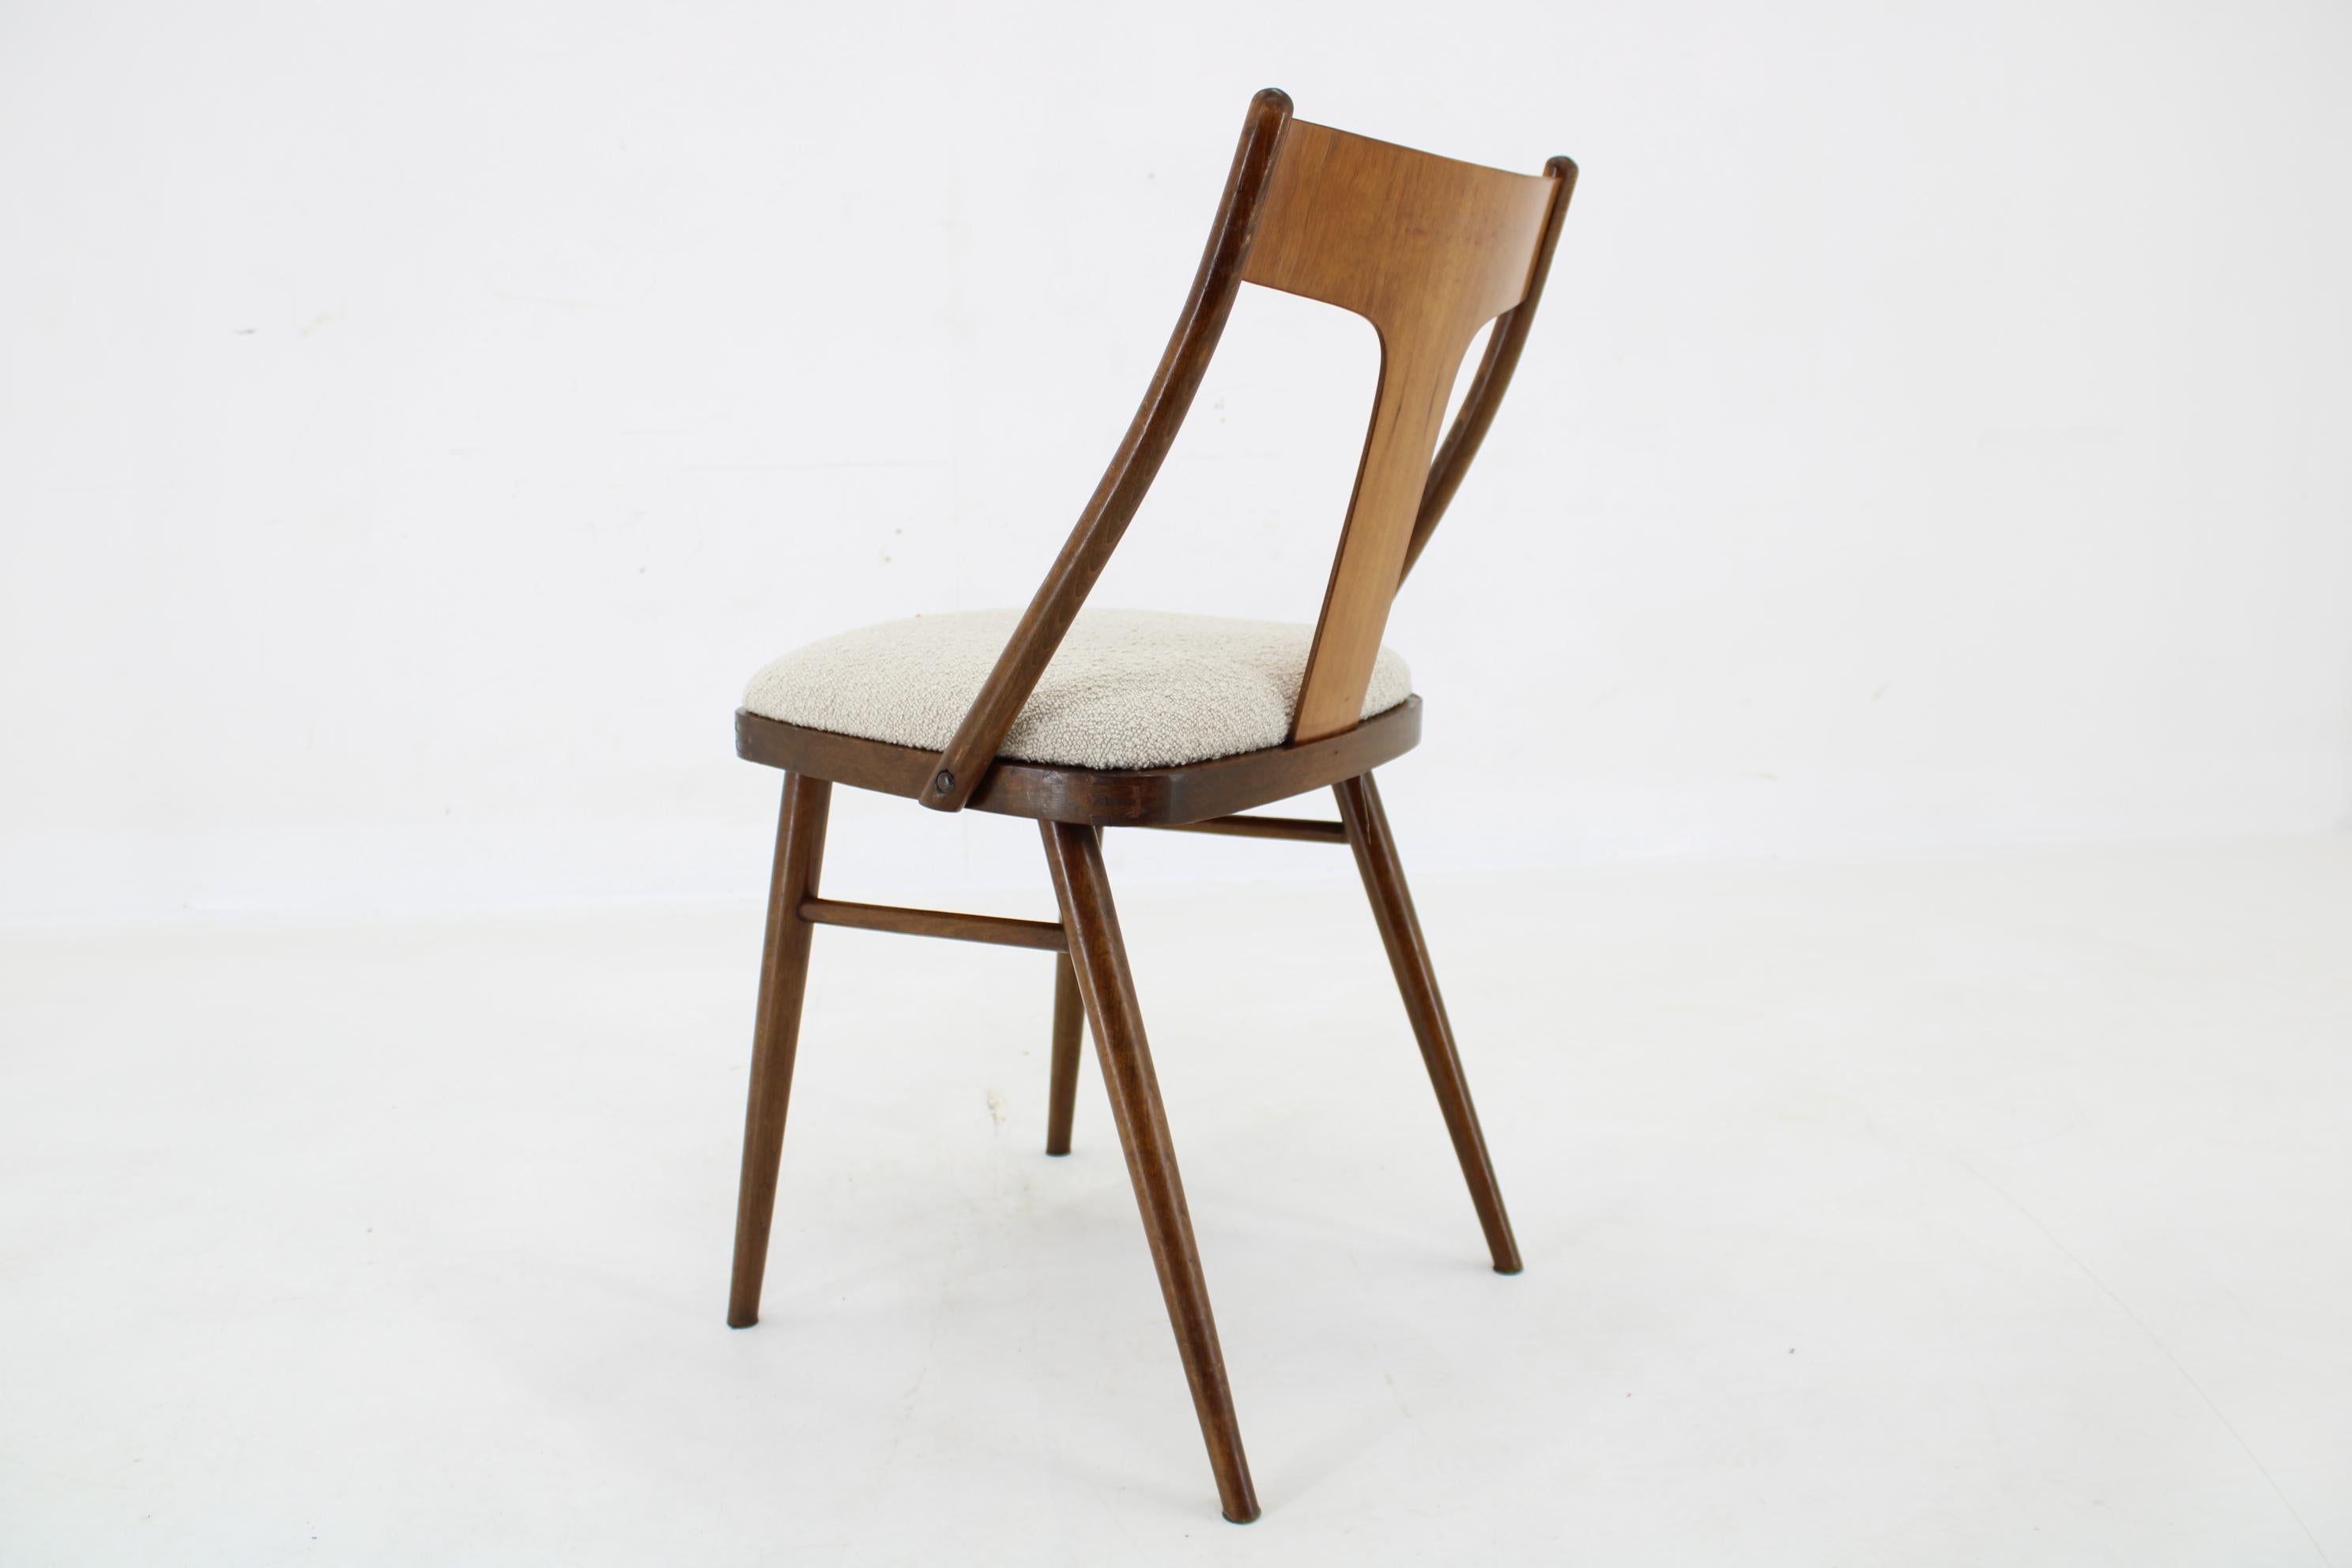 1950s Set of 4 Dining Chairs in Walnut Finish, Czechoslovakia  For Sale 1